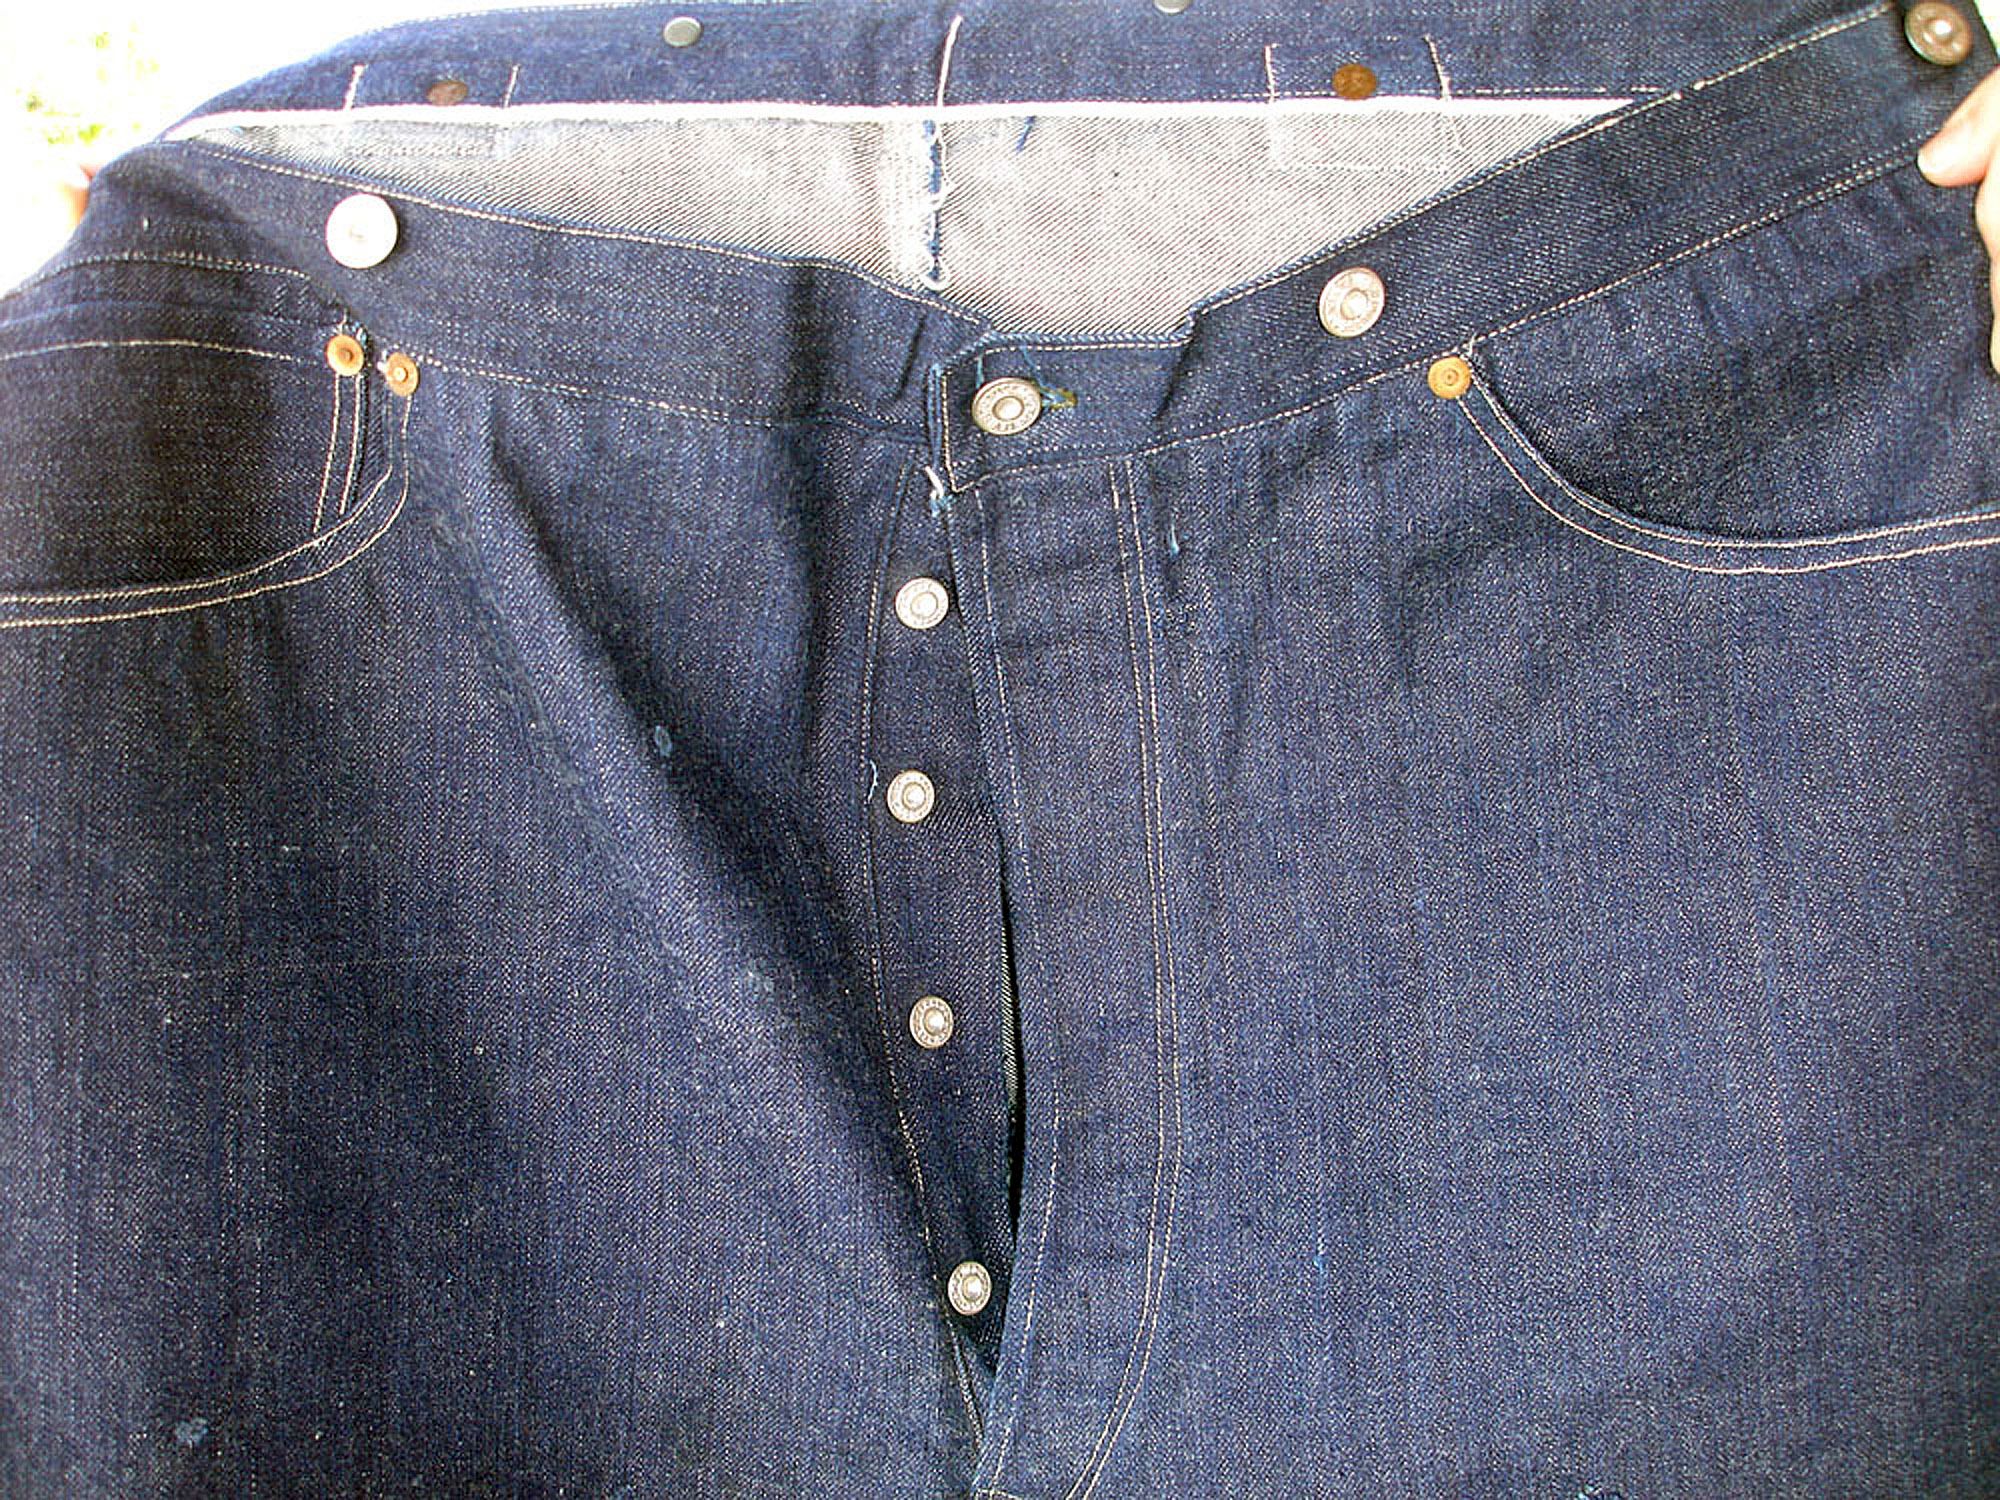 Vintage denim: 125-year-old Levis sell for nearly $100K